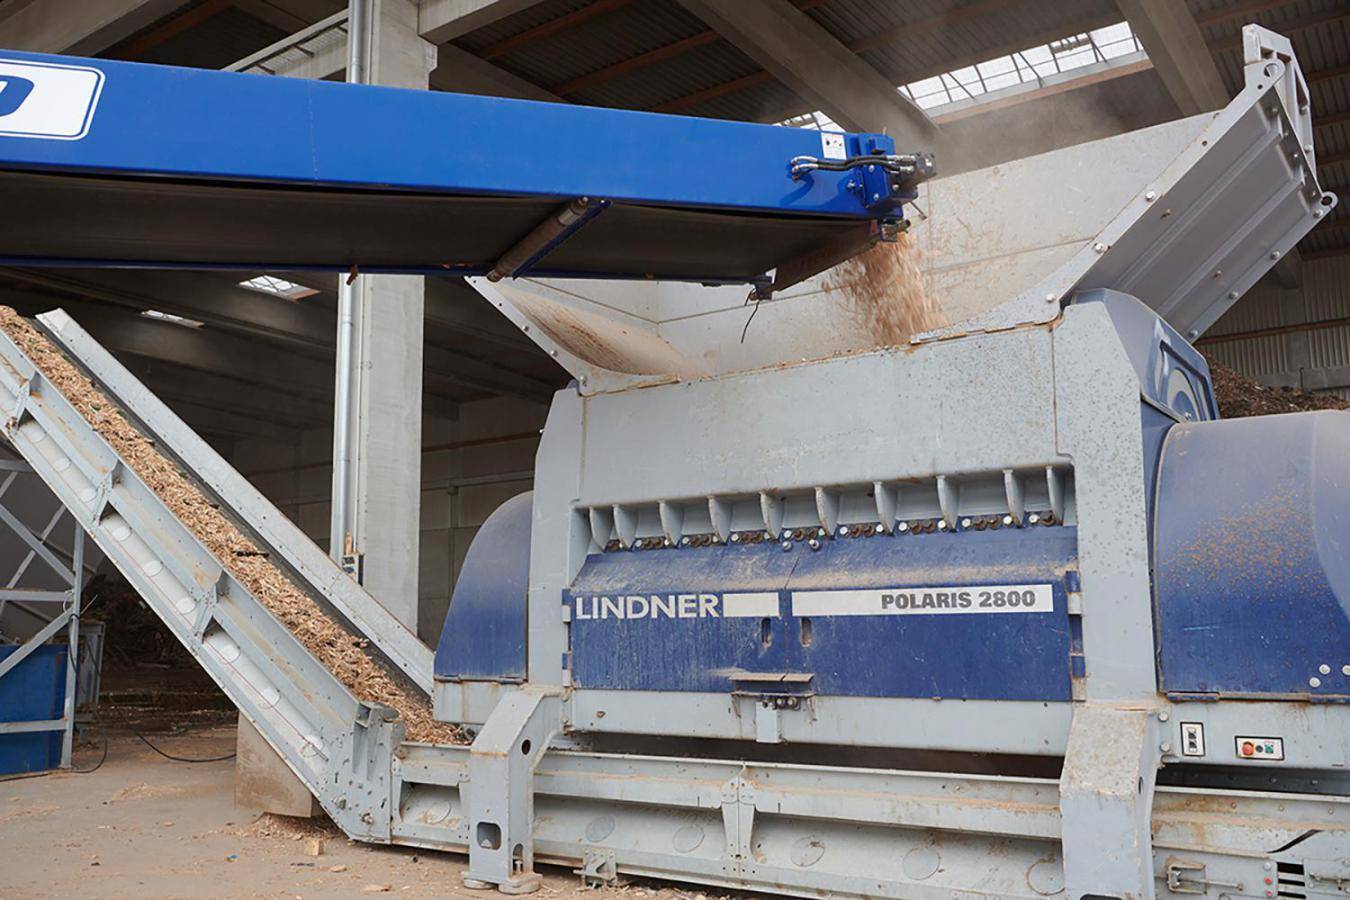 The Lindner Polaris 2800 shredder is designed for continuous operation